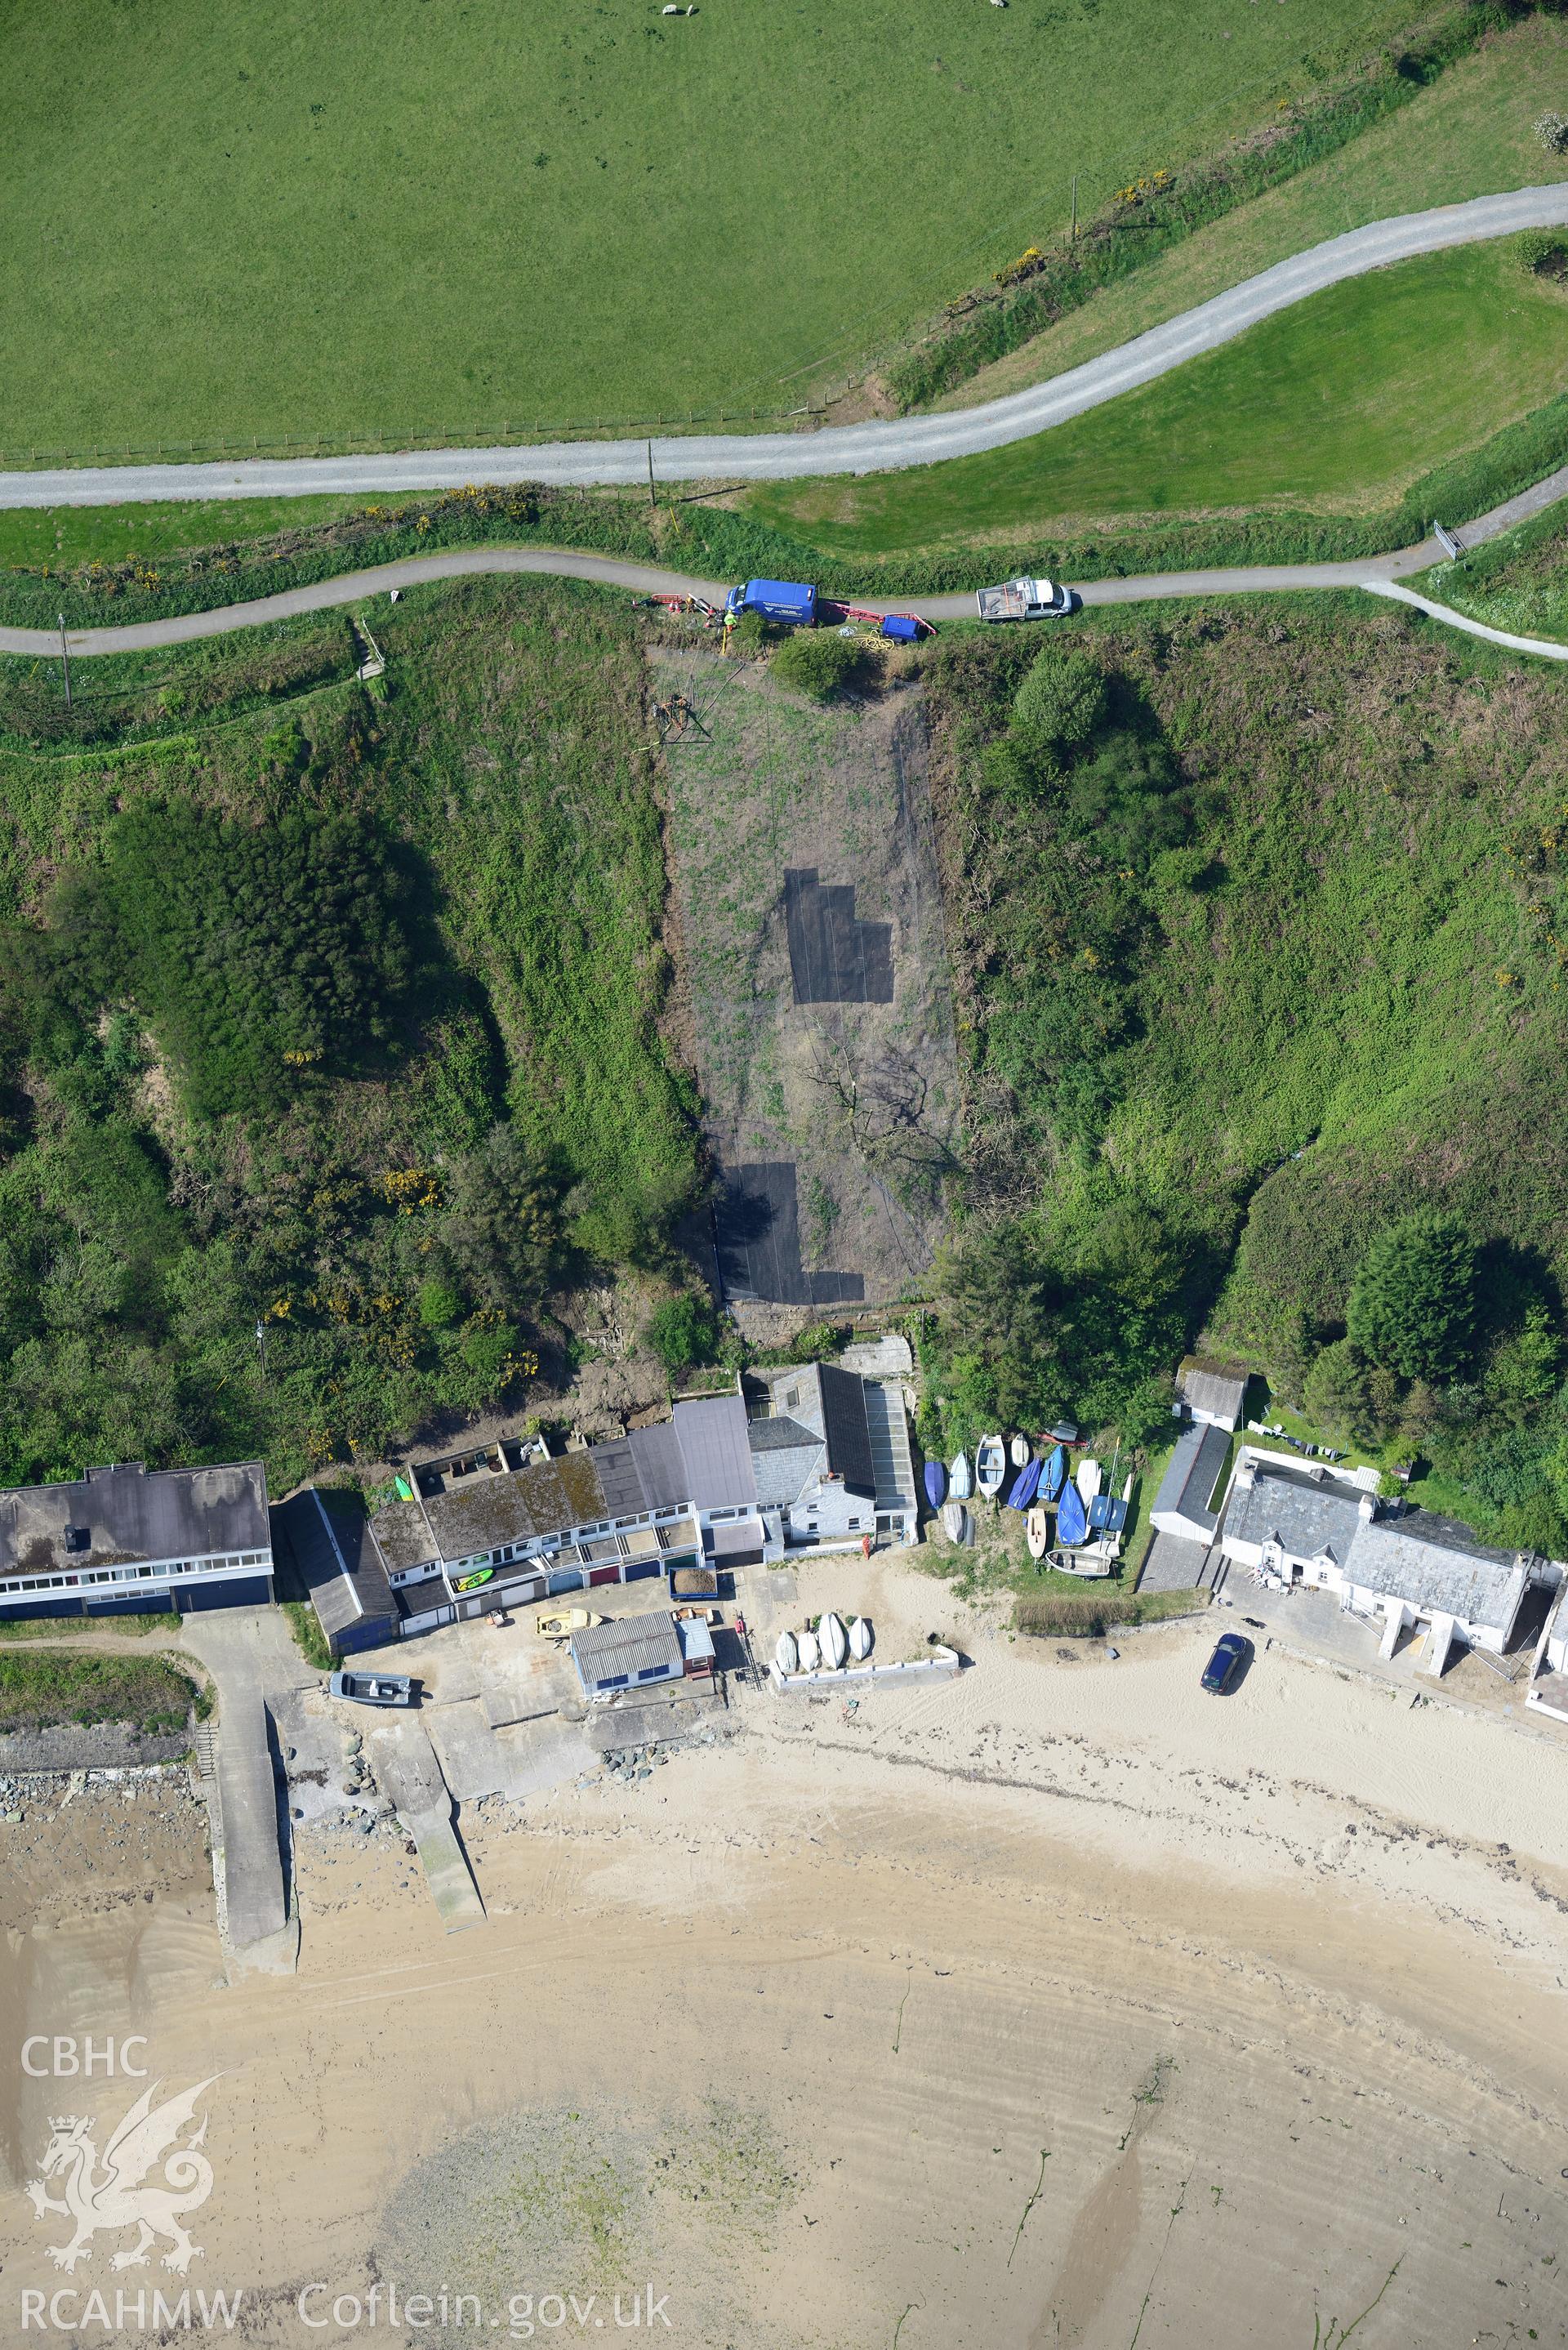 Aerial photography of Penrhyn Nefyn harbour taken on 3rd May 2017.  Baseline aerial reconnaissance survey for the CHERISH Project. ? Crown: CHERISH PROJECT 2017. Produced with EU funds through the Ireland Wales Co-operation Programme 2014-2020. All material made freely available through the Open Government Licence.